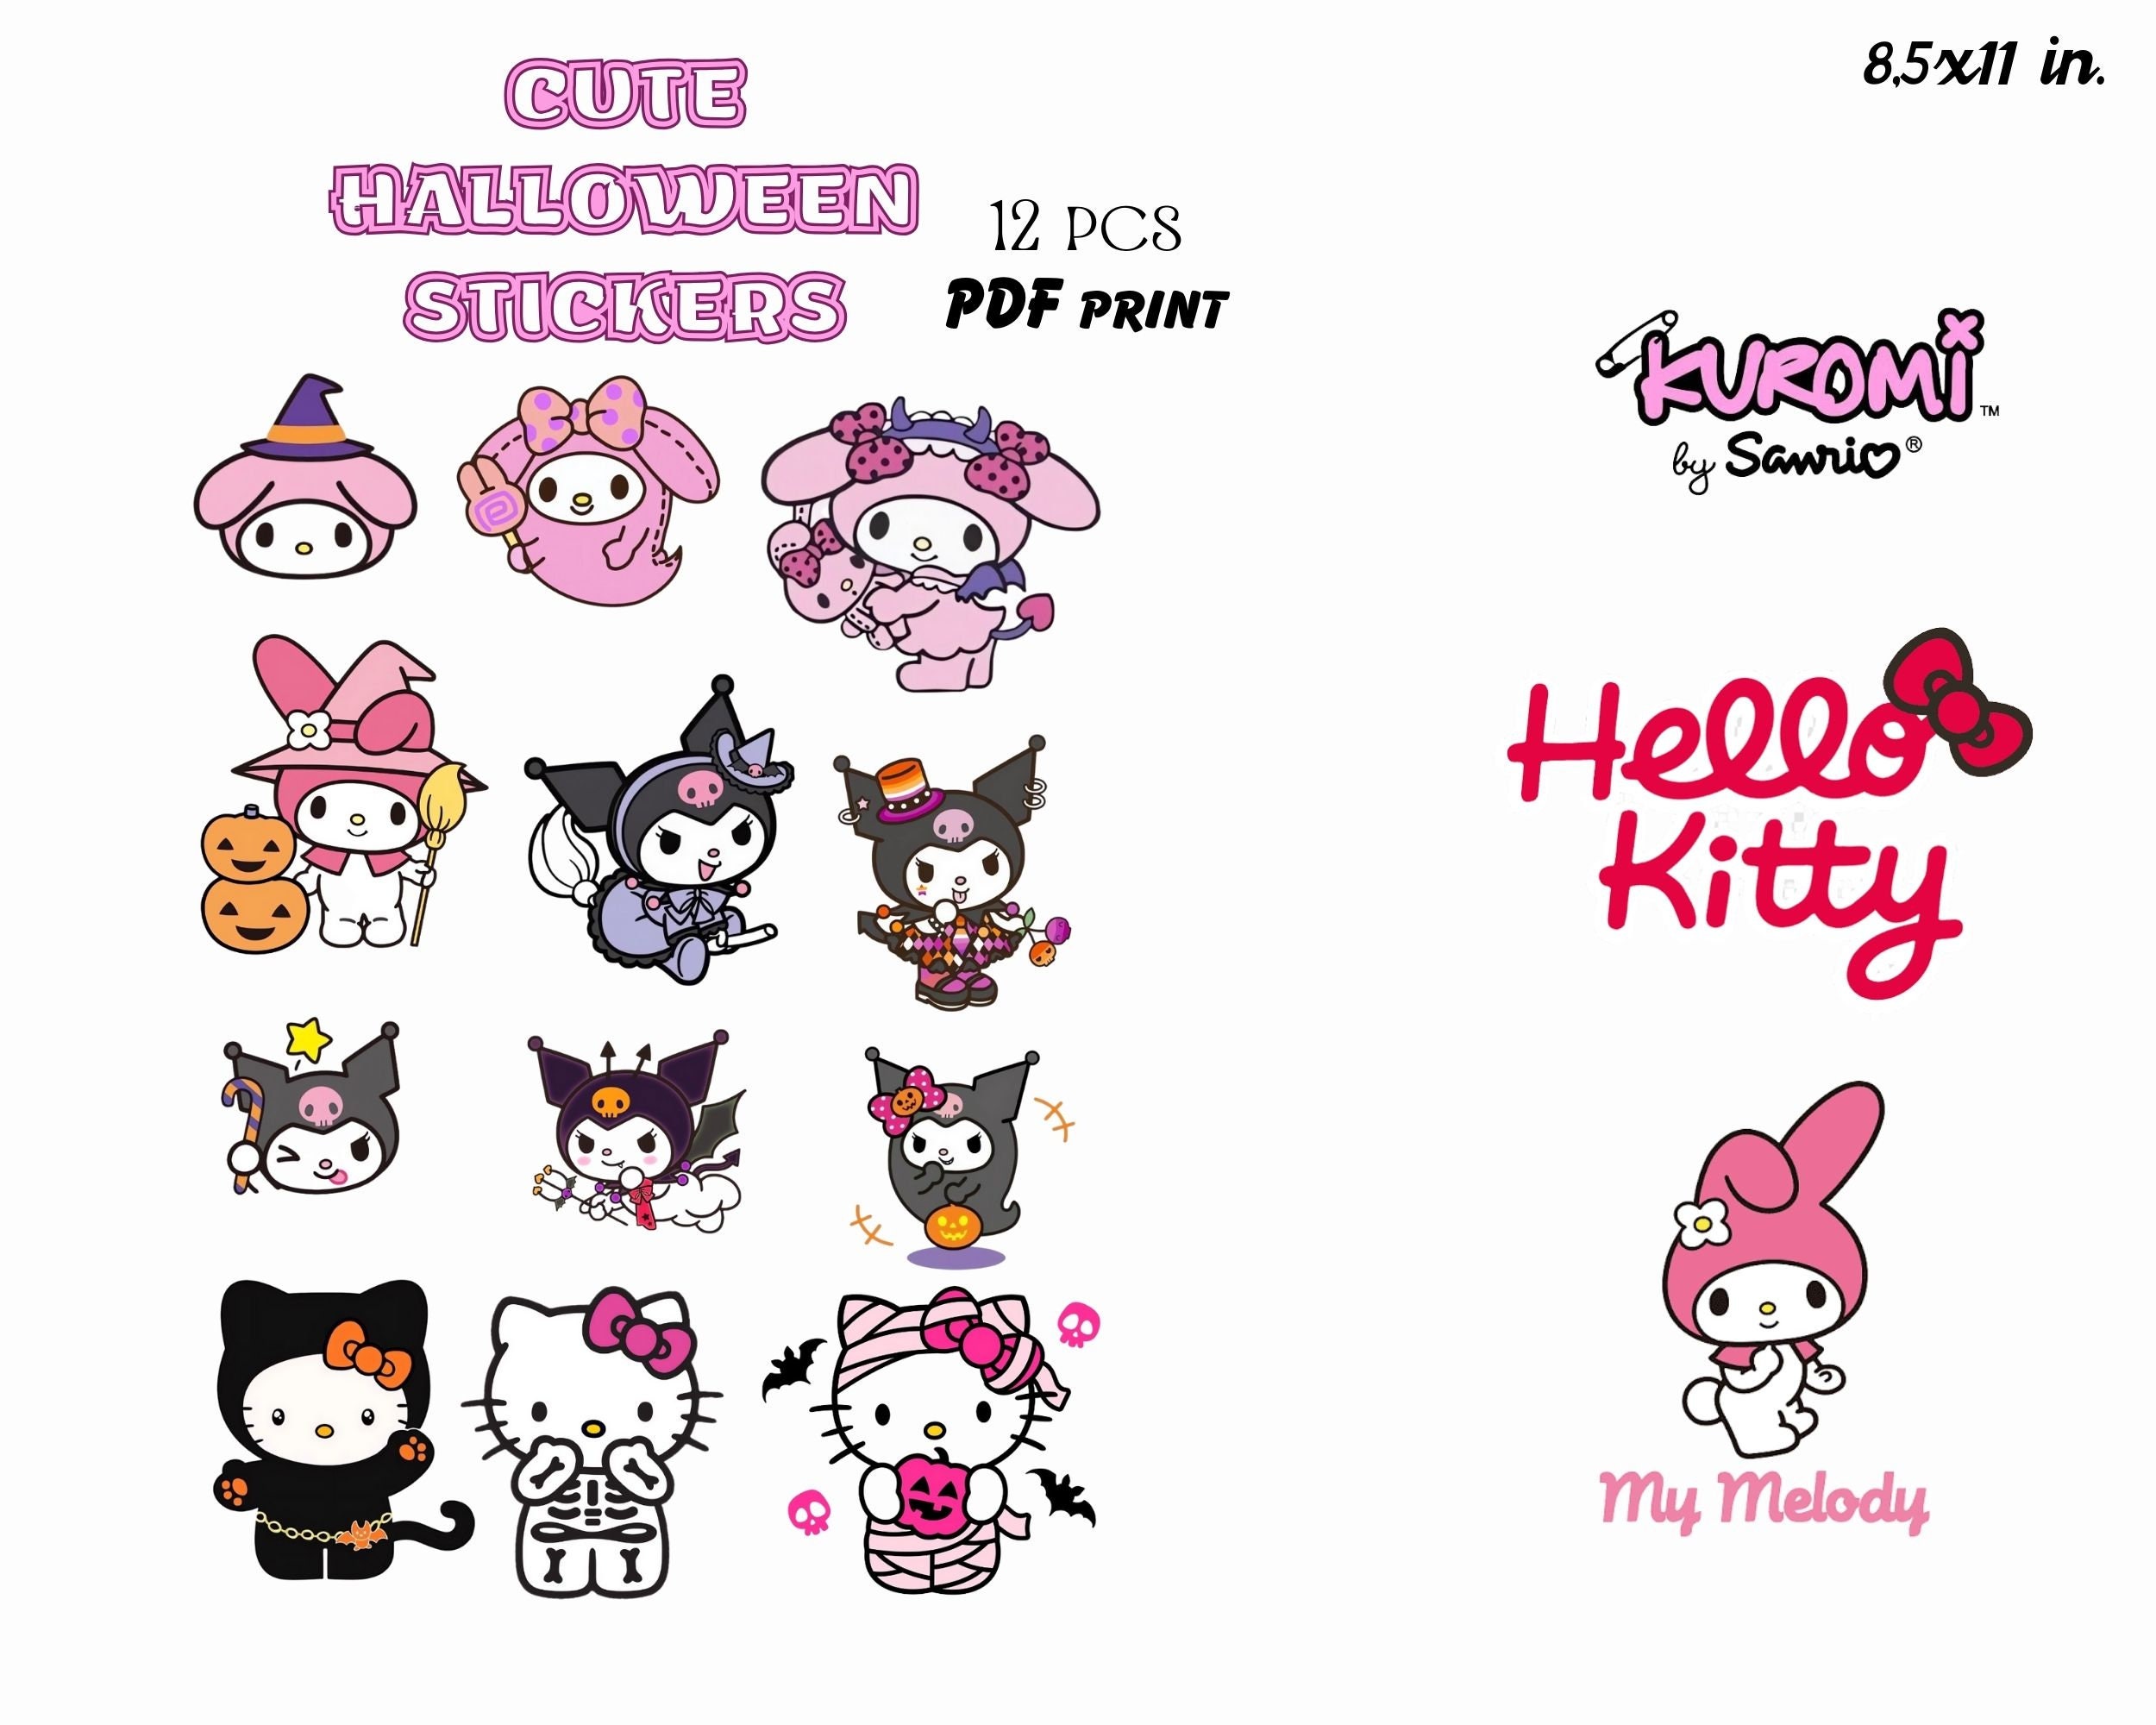 Hello kitty sticker printable  Hello kitty printables, Cute stickers,  Iphone case stickers